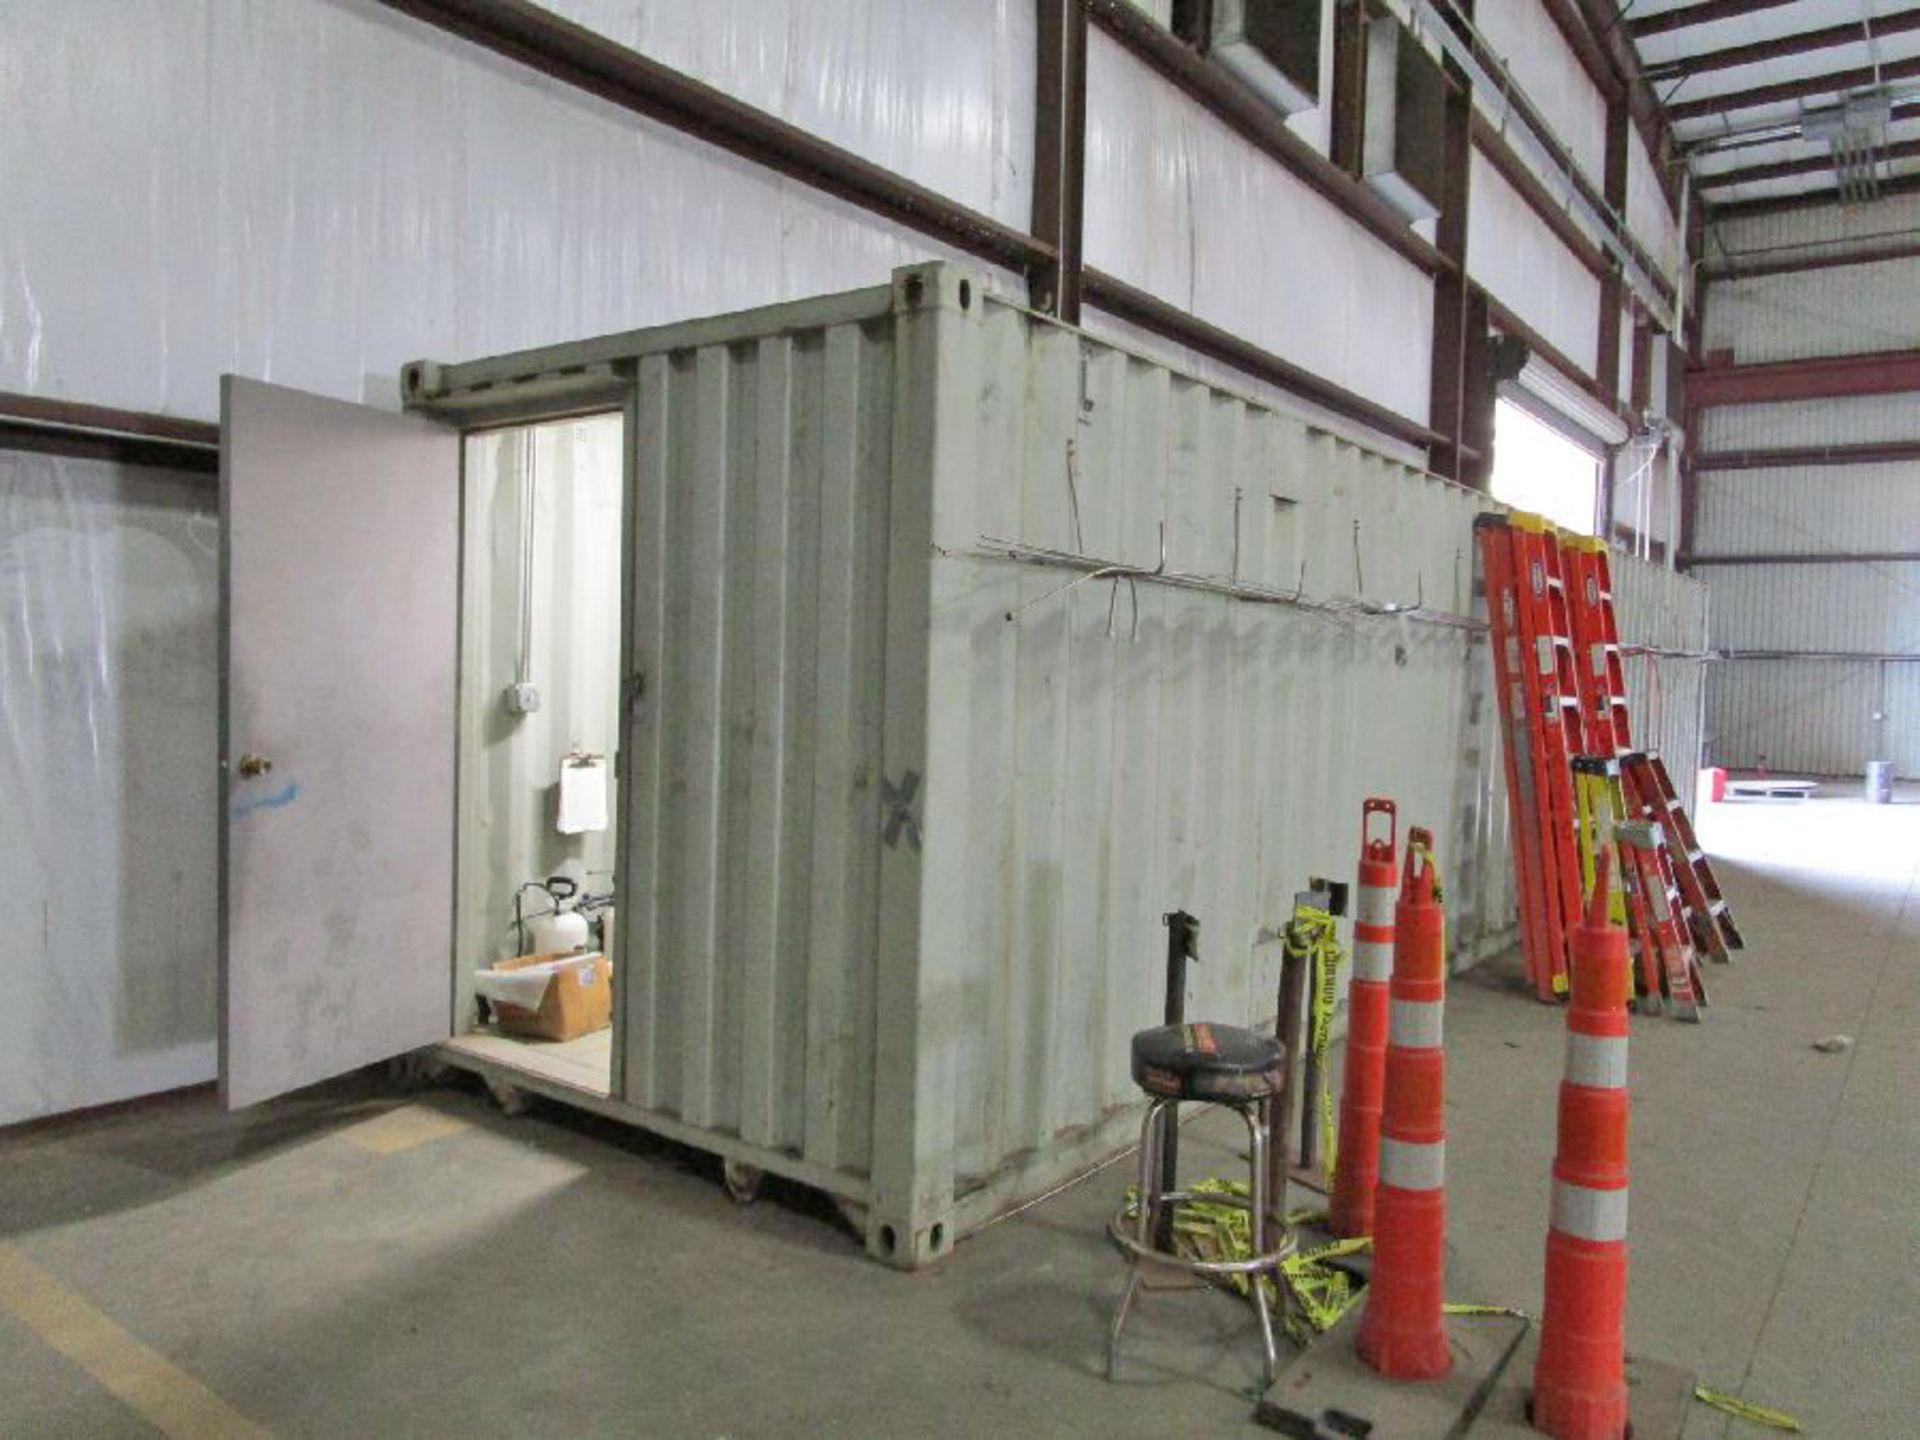 Oversea Shipping Container - Image 14 of 14